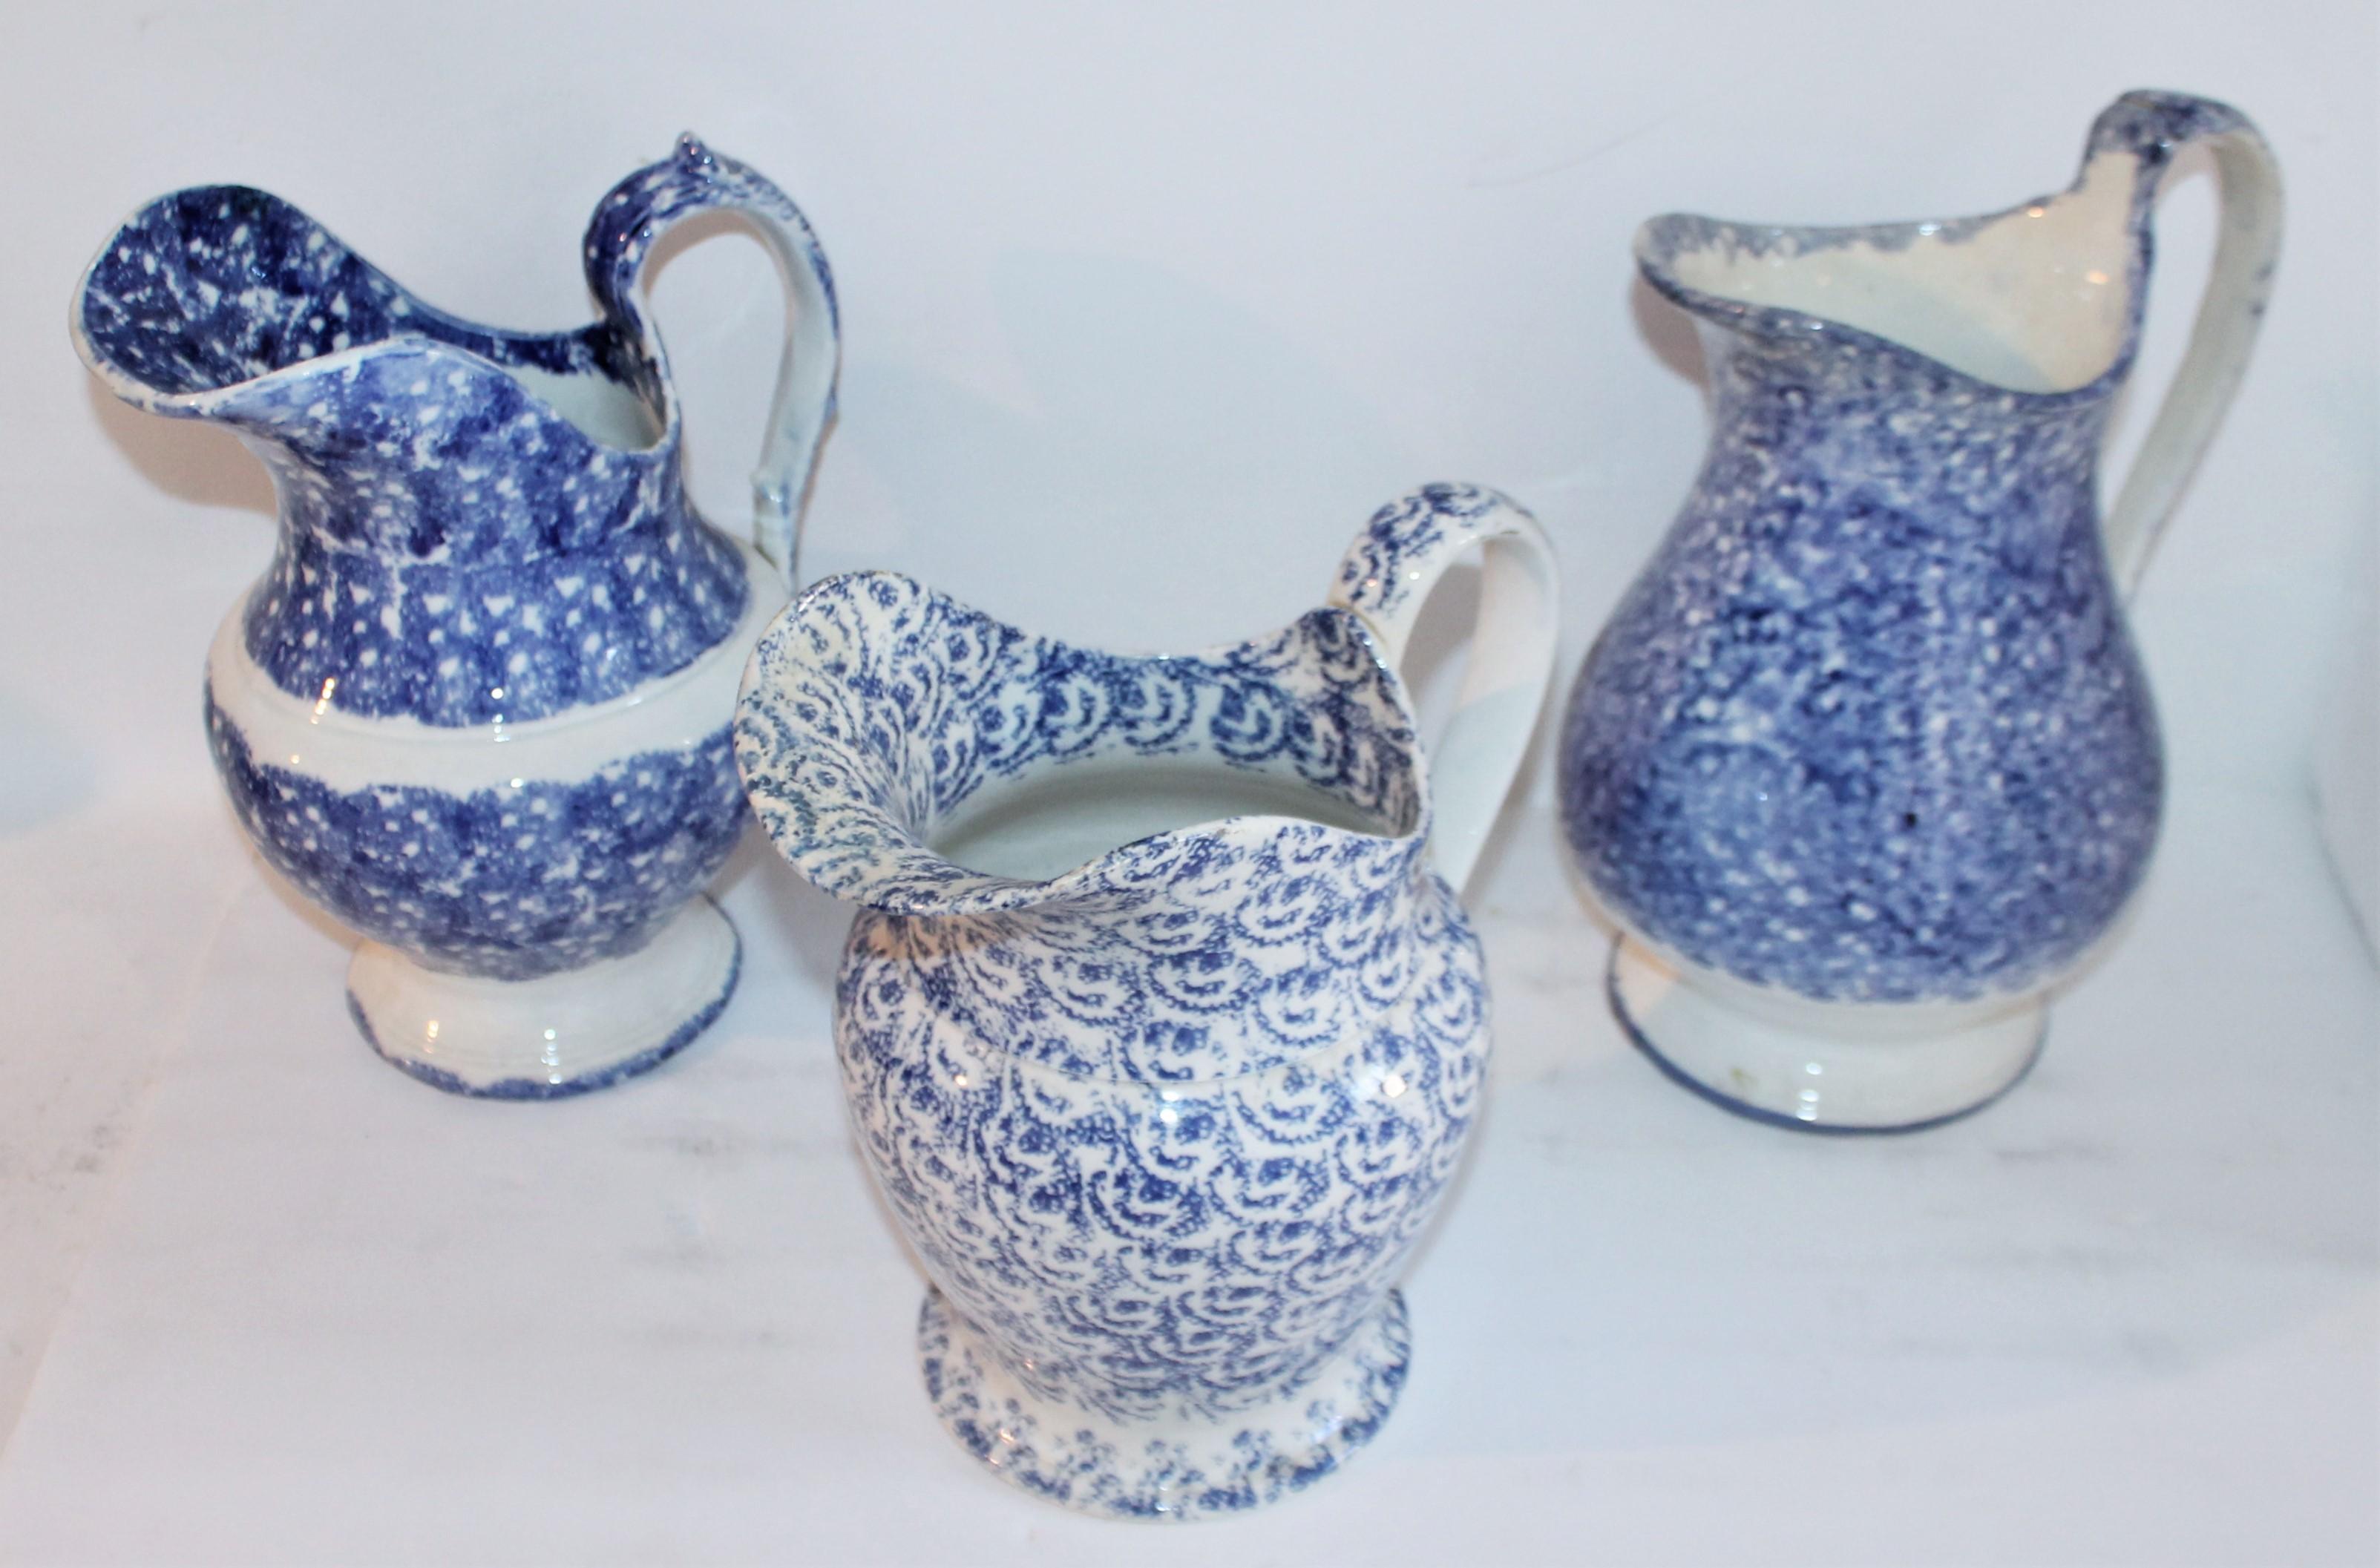 Collection of three 19th century spatter ware water pitchers in pristine condition. The shorter of the three is really quite unusual and is more of a design sponge pattern.